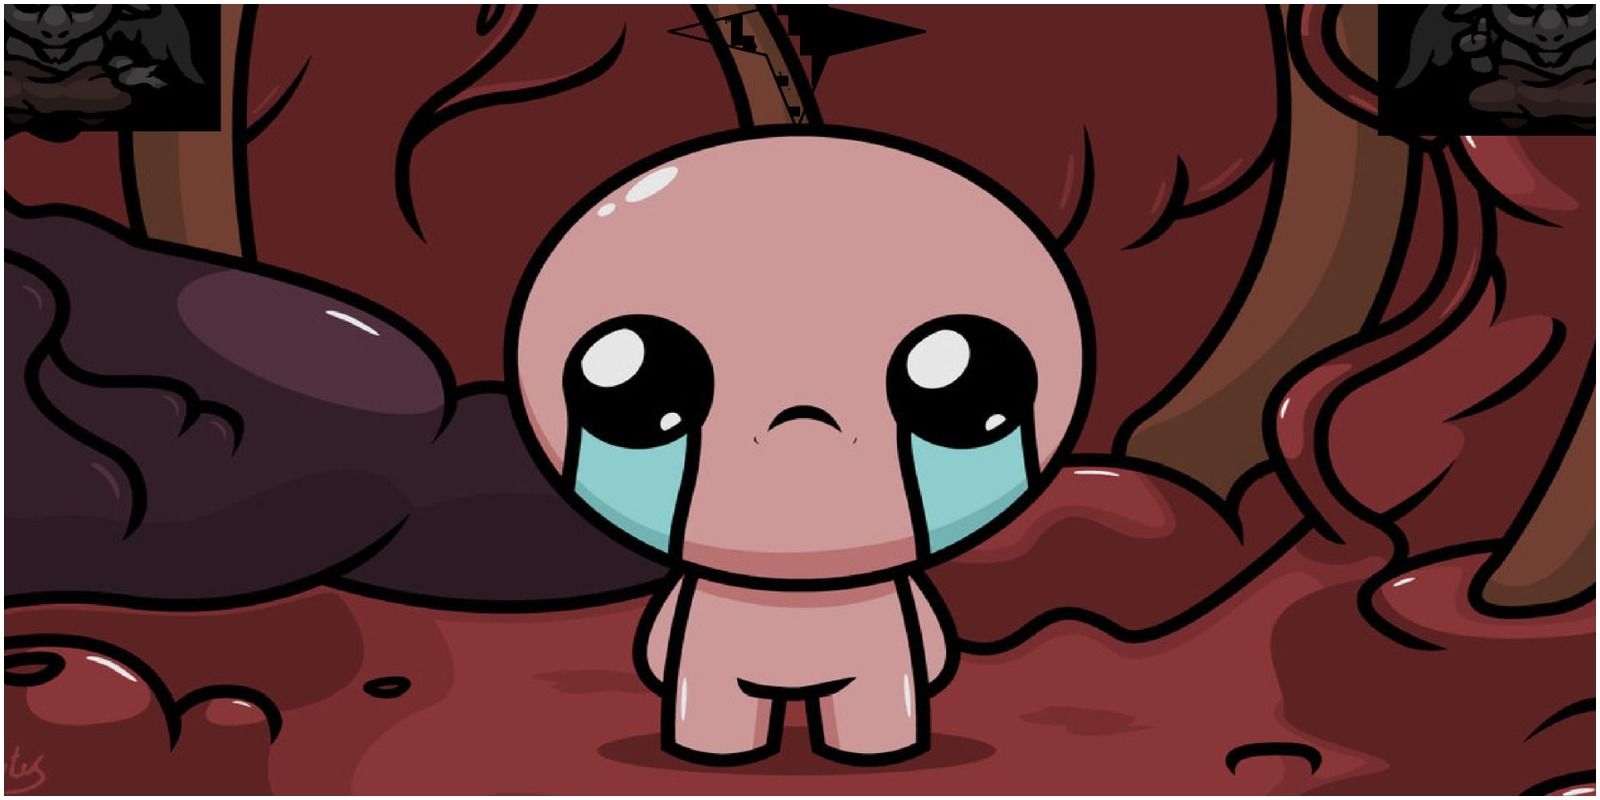 Isaac from The Binding of Isaac concept art.